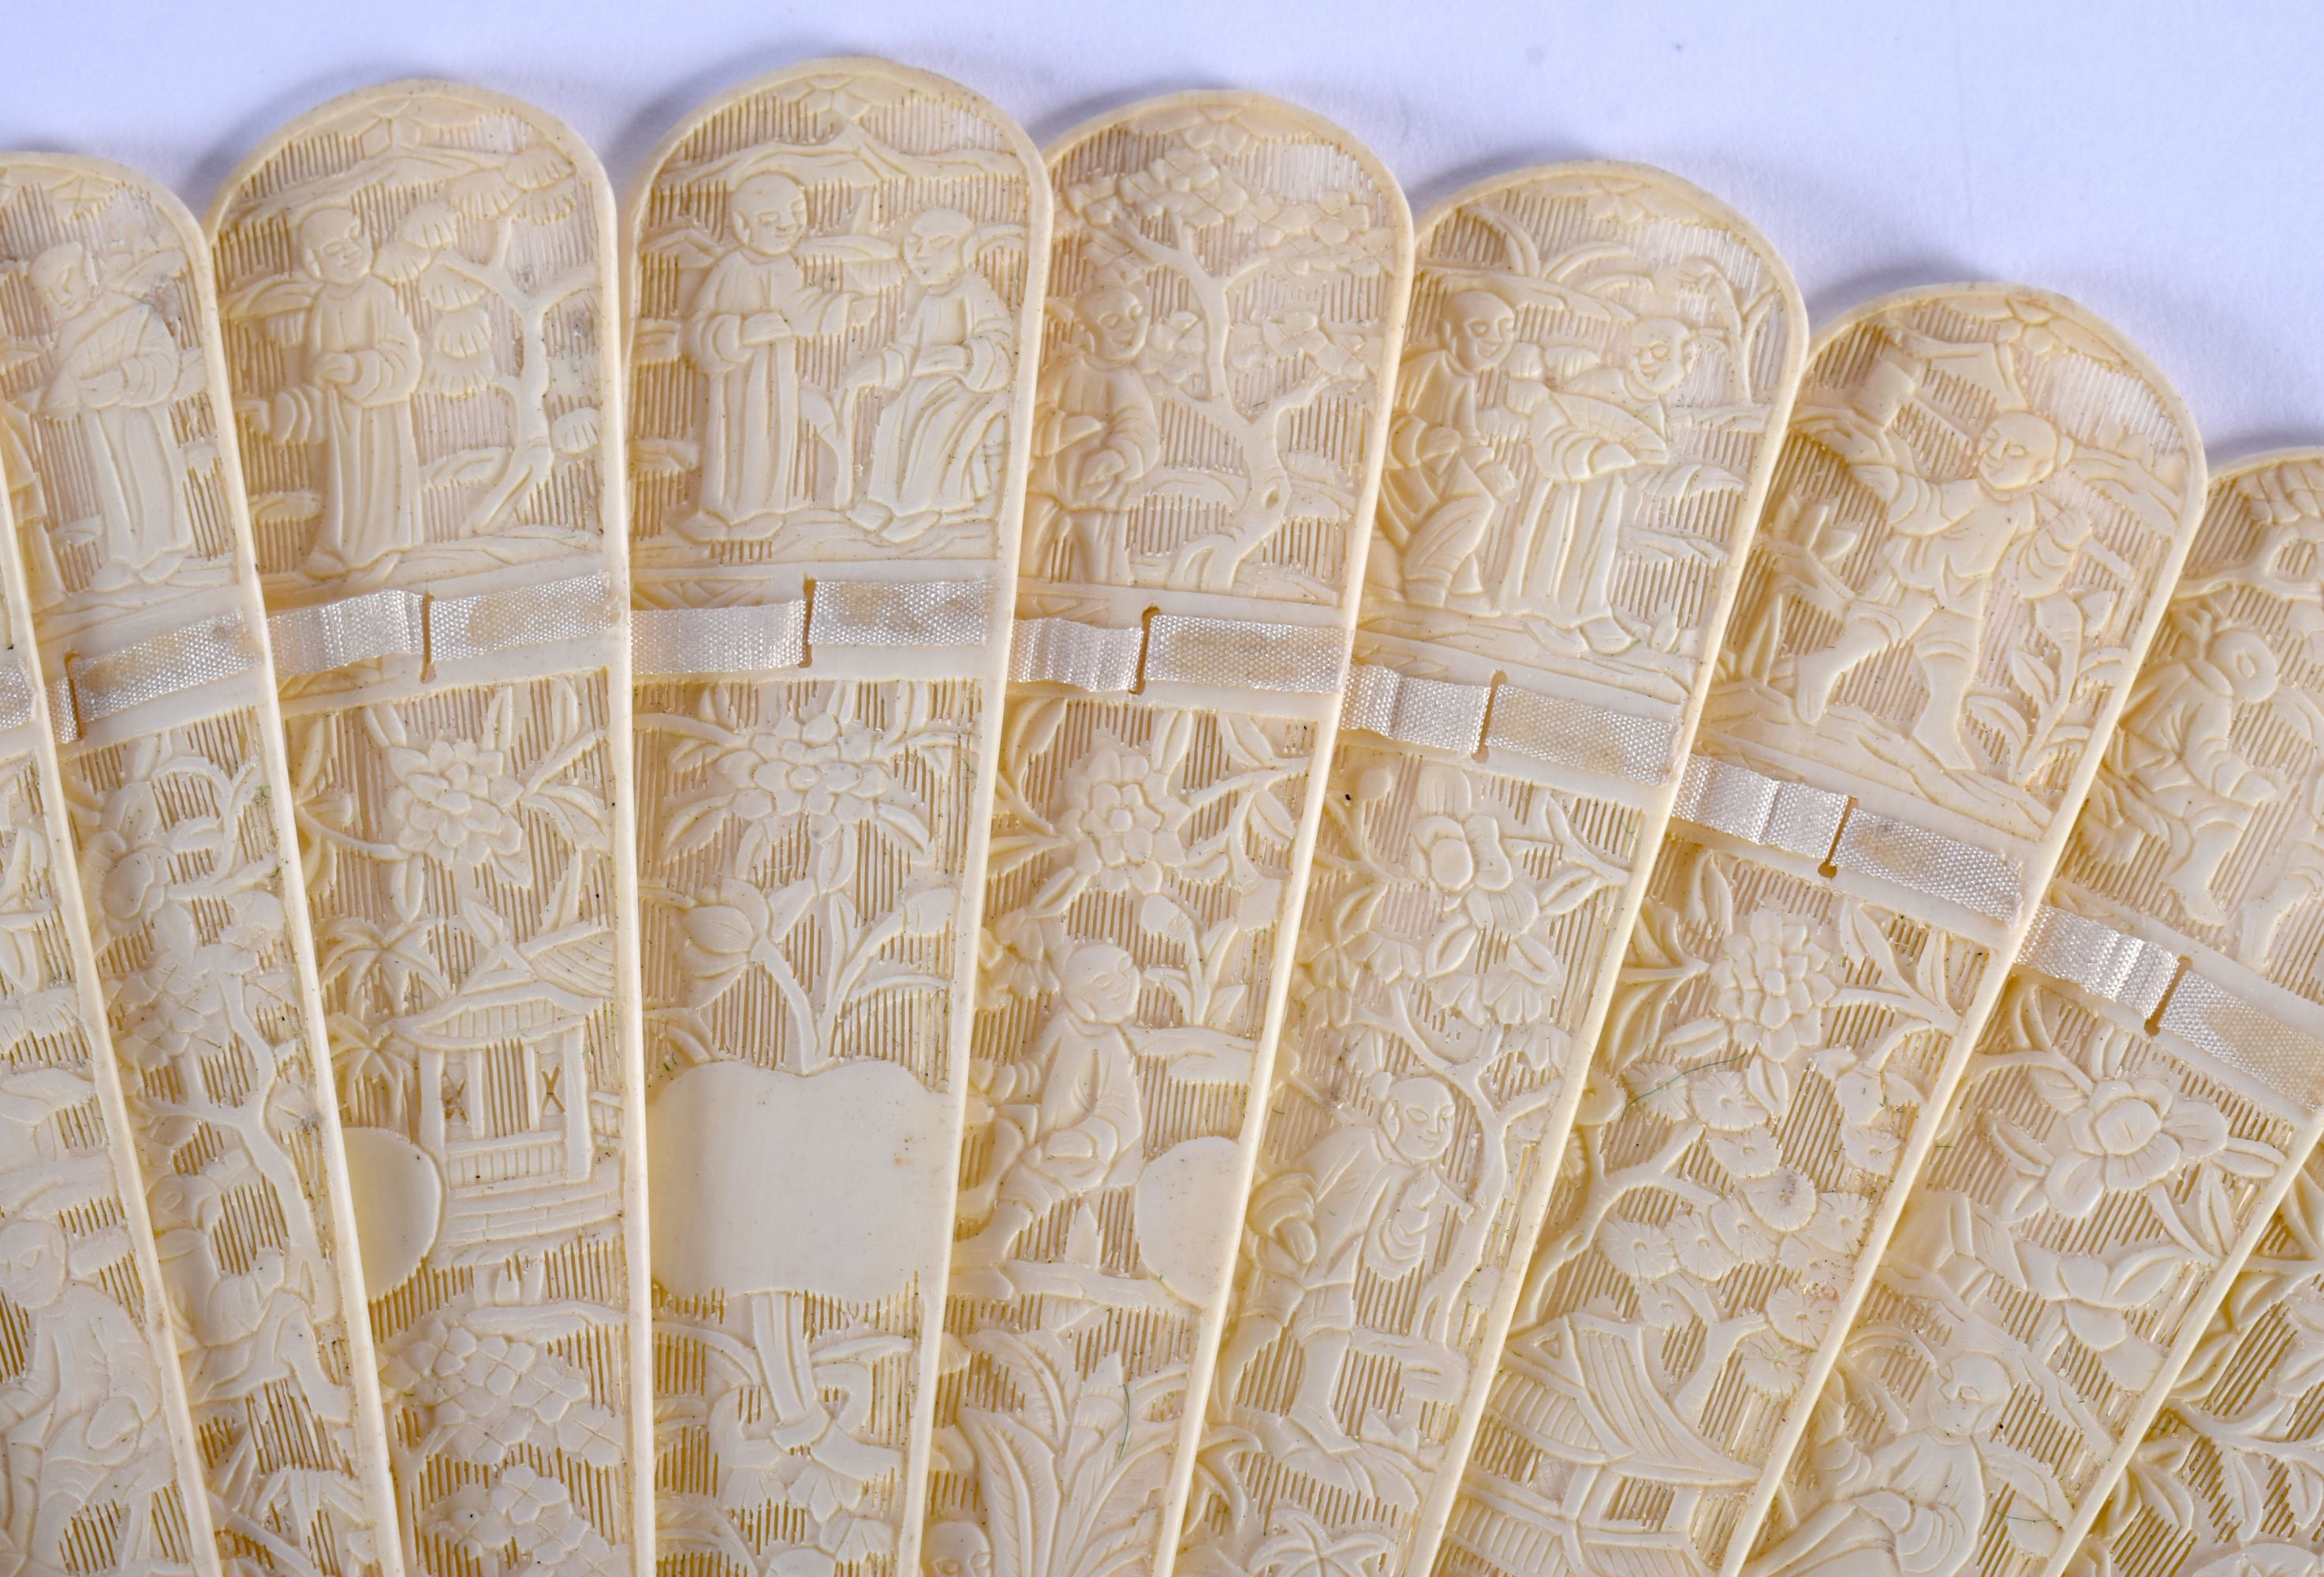 A FINE 19TH CENTURY CHINESE CARVED IVORY BRISE FAN C1840 decorated with figures. 30 cm wide extended - Image 3 of 17